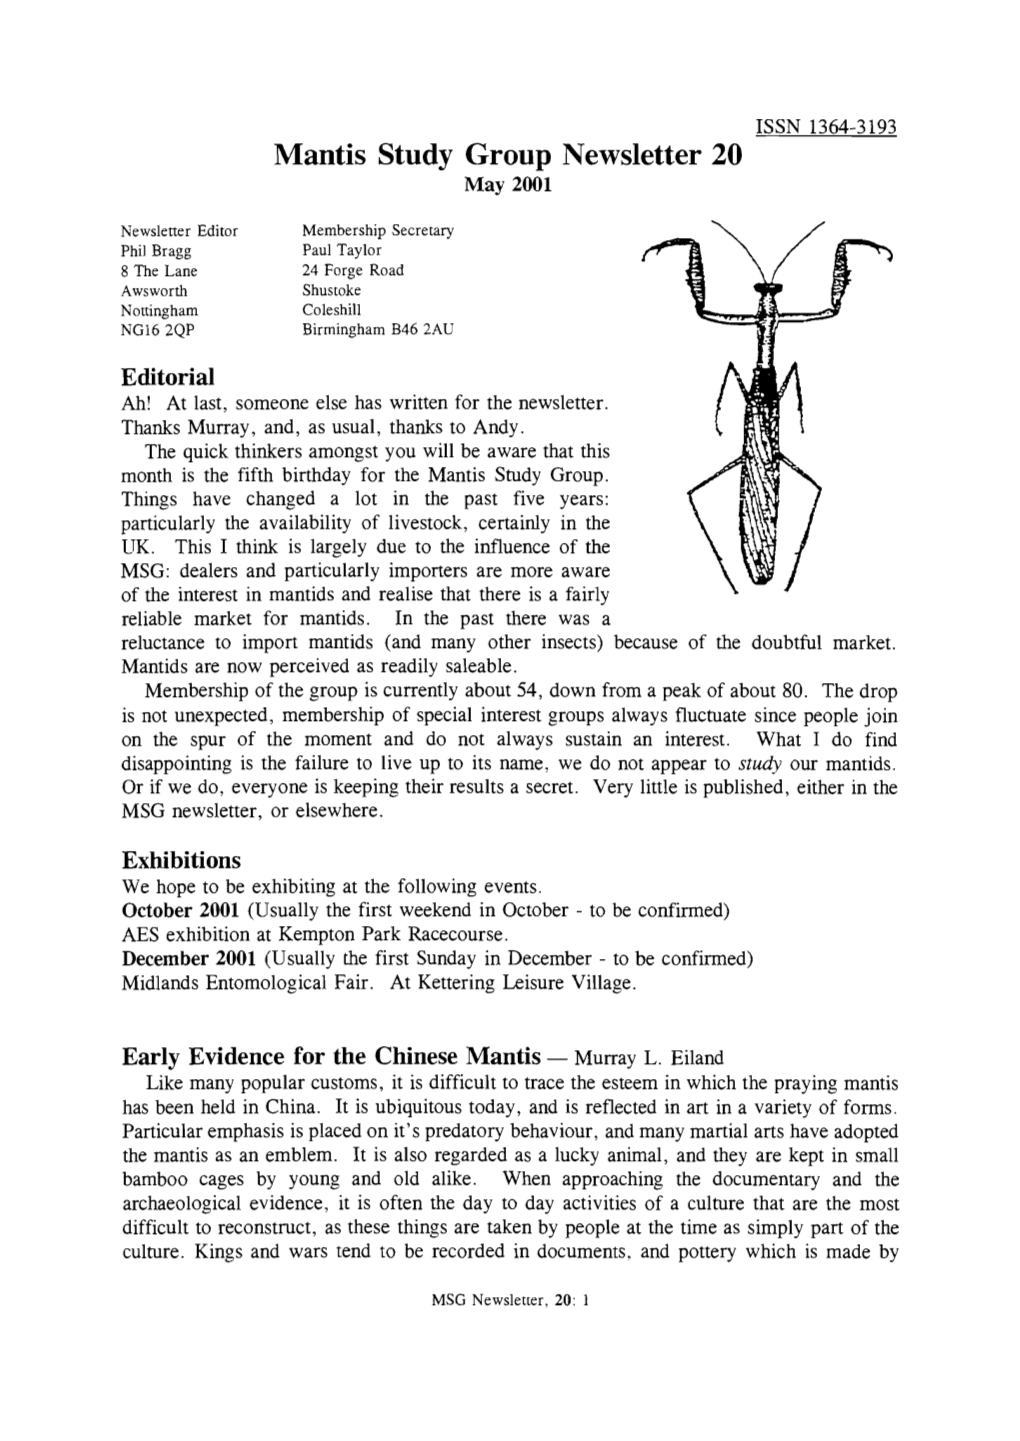 Mantis Study Group Newsletter, 20 (May 2001)